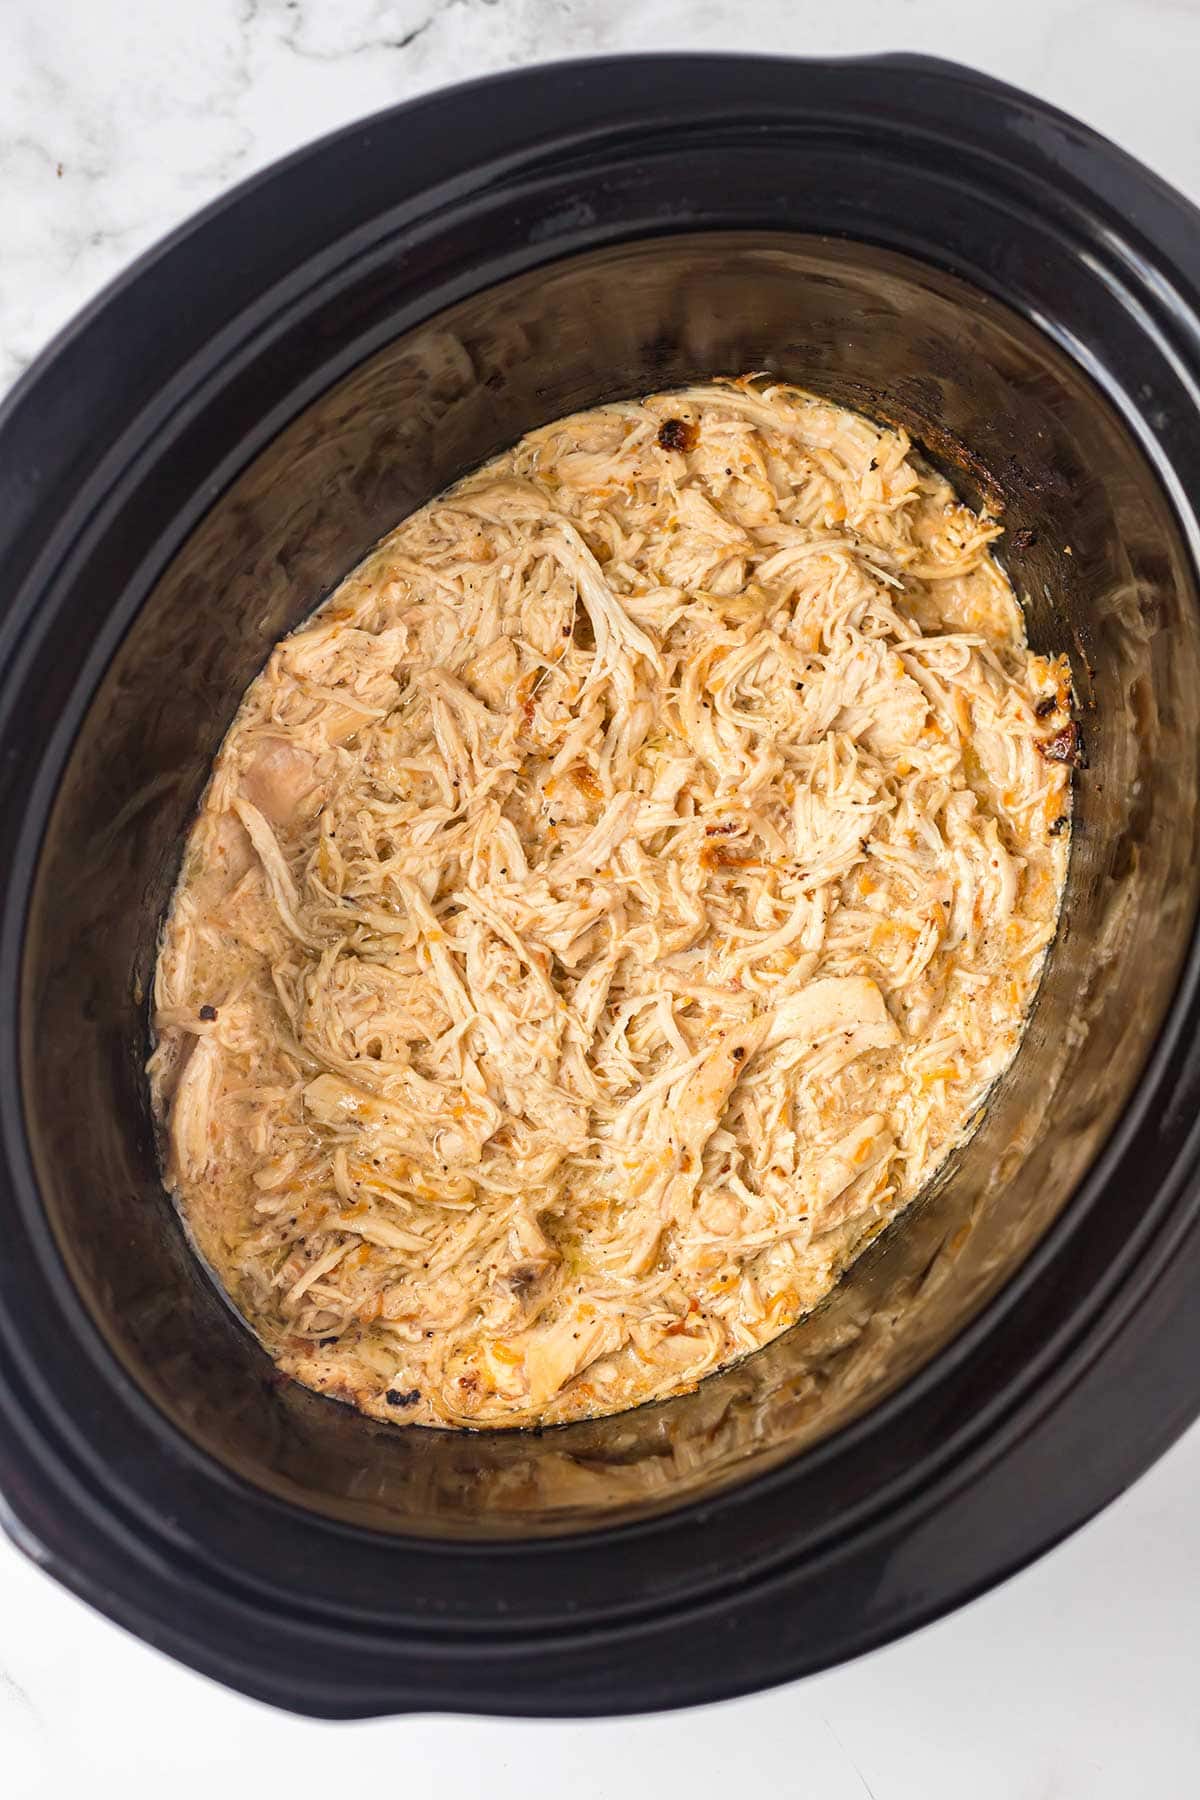 Caesar Chicken freezer meal being cooked in a slow cooker.